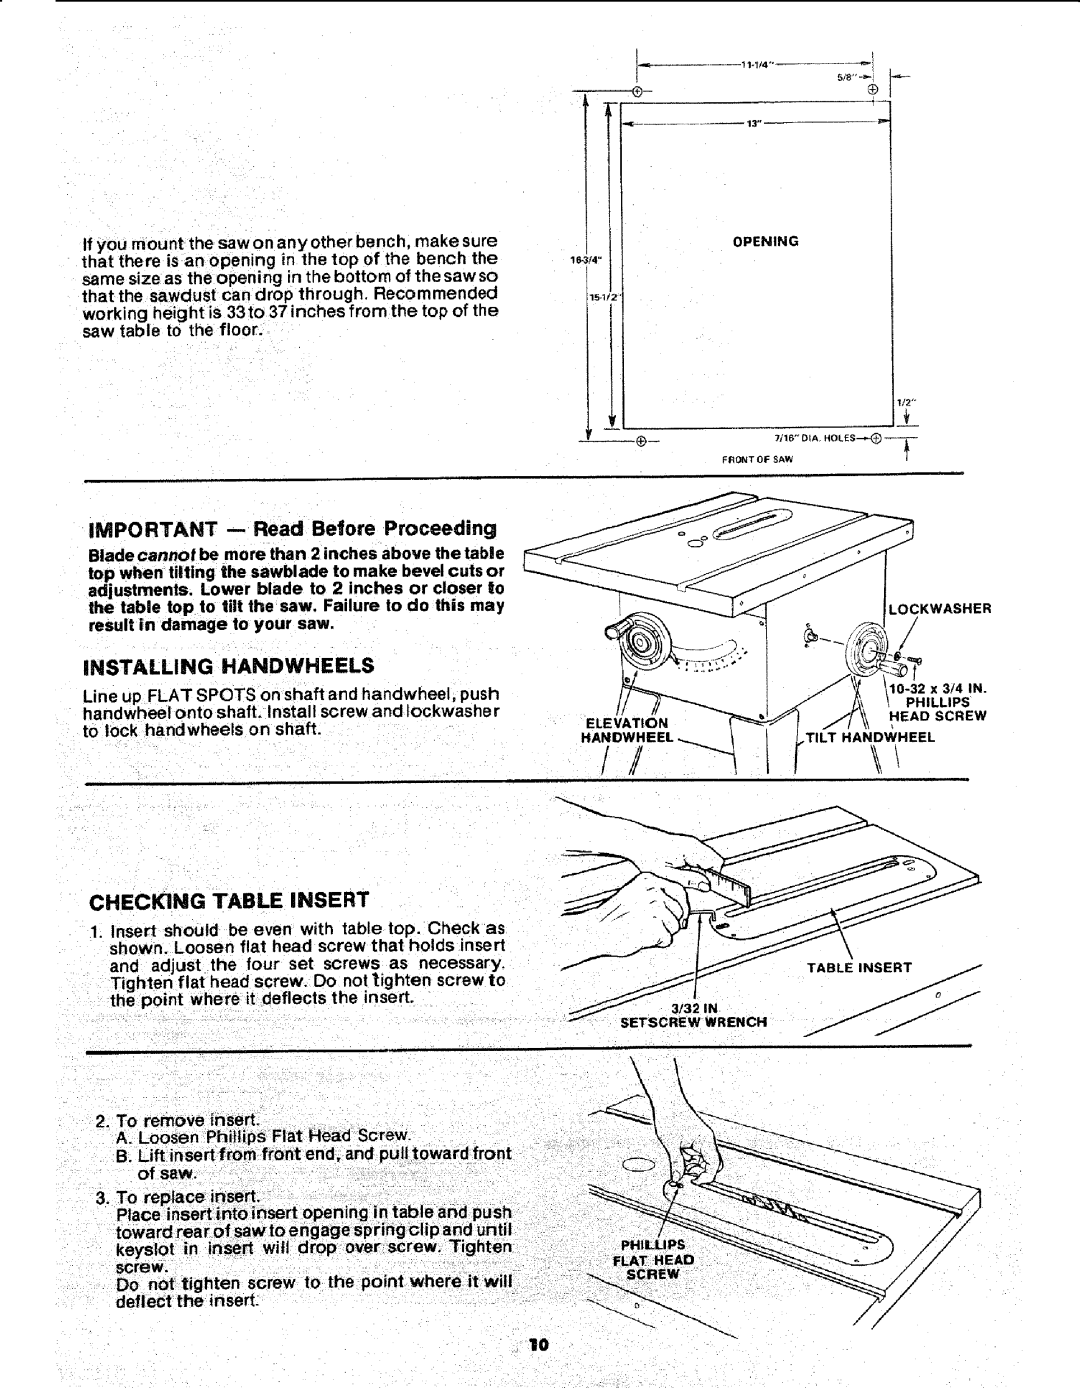 Sears 113.241591 owner manual IMPORTANT -- Read Before Proceeding, Installing Handwheels, Checking Table Ins Ert 